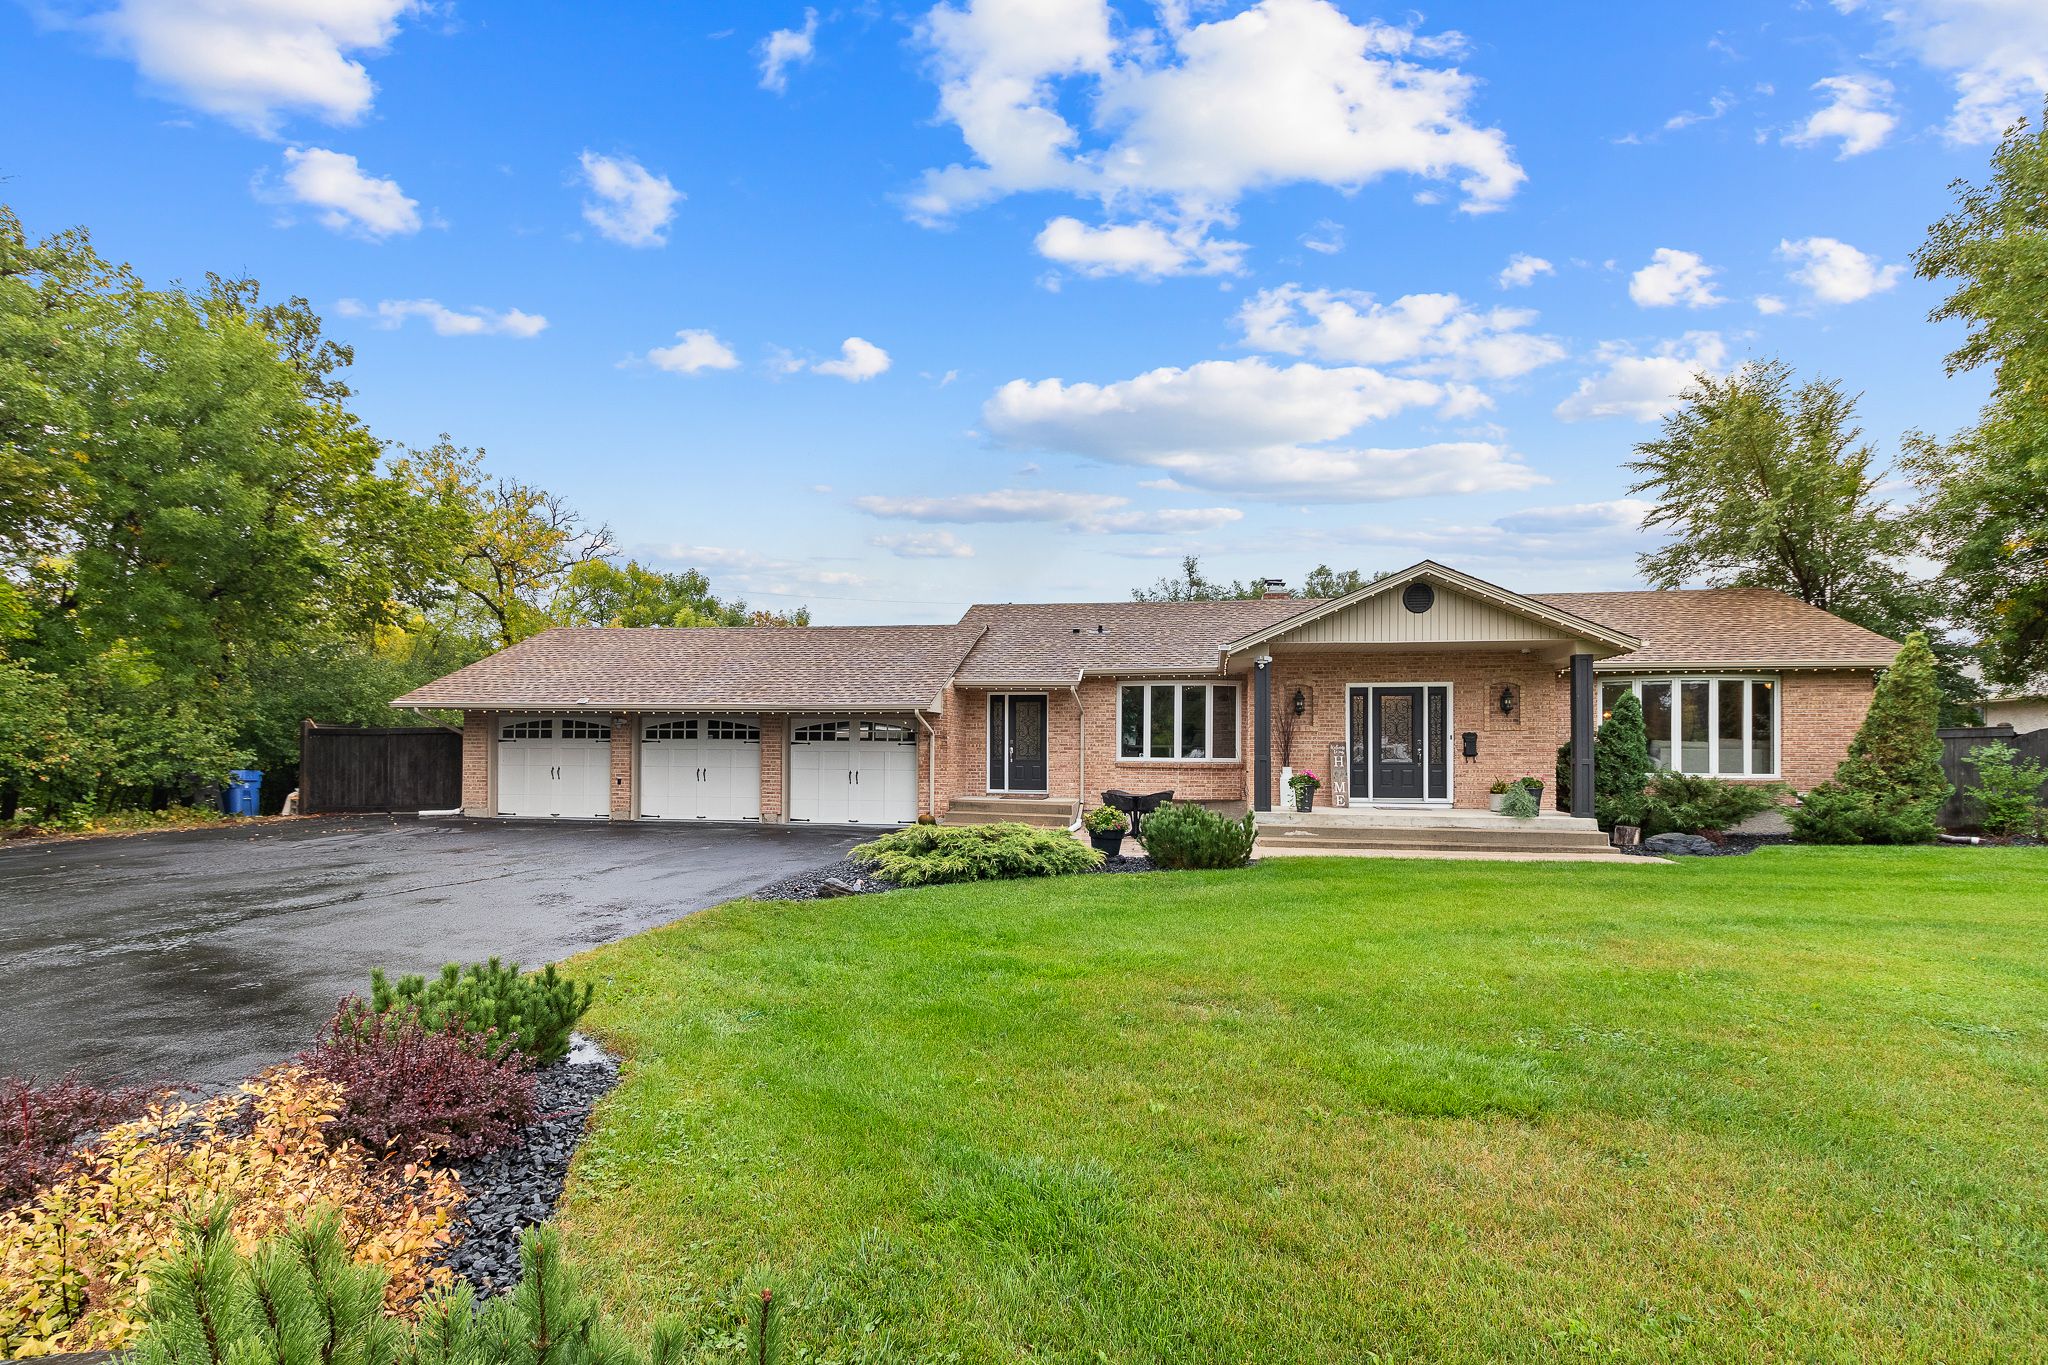 Open House. Open House on Saturday, April 29, 2023 12:00PM - 2:00PM
Amazing family home in East St.Paul with Pool!
5 Beds, 3.5 Baths, Finbasement. Landscaped backyard feat a heated inground pool, 2 pergolas, large patio &amp; automated in-ground lighting 